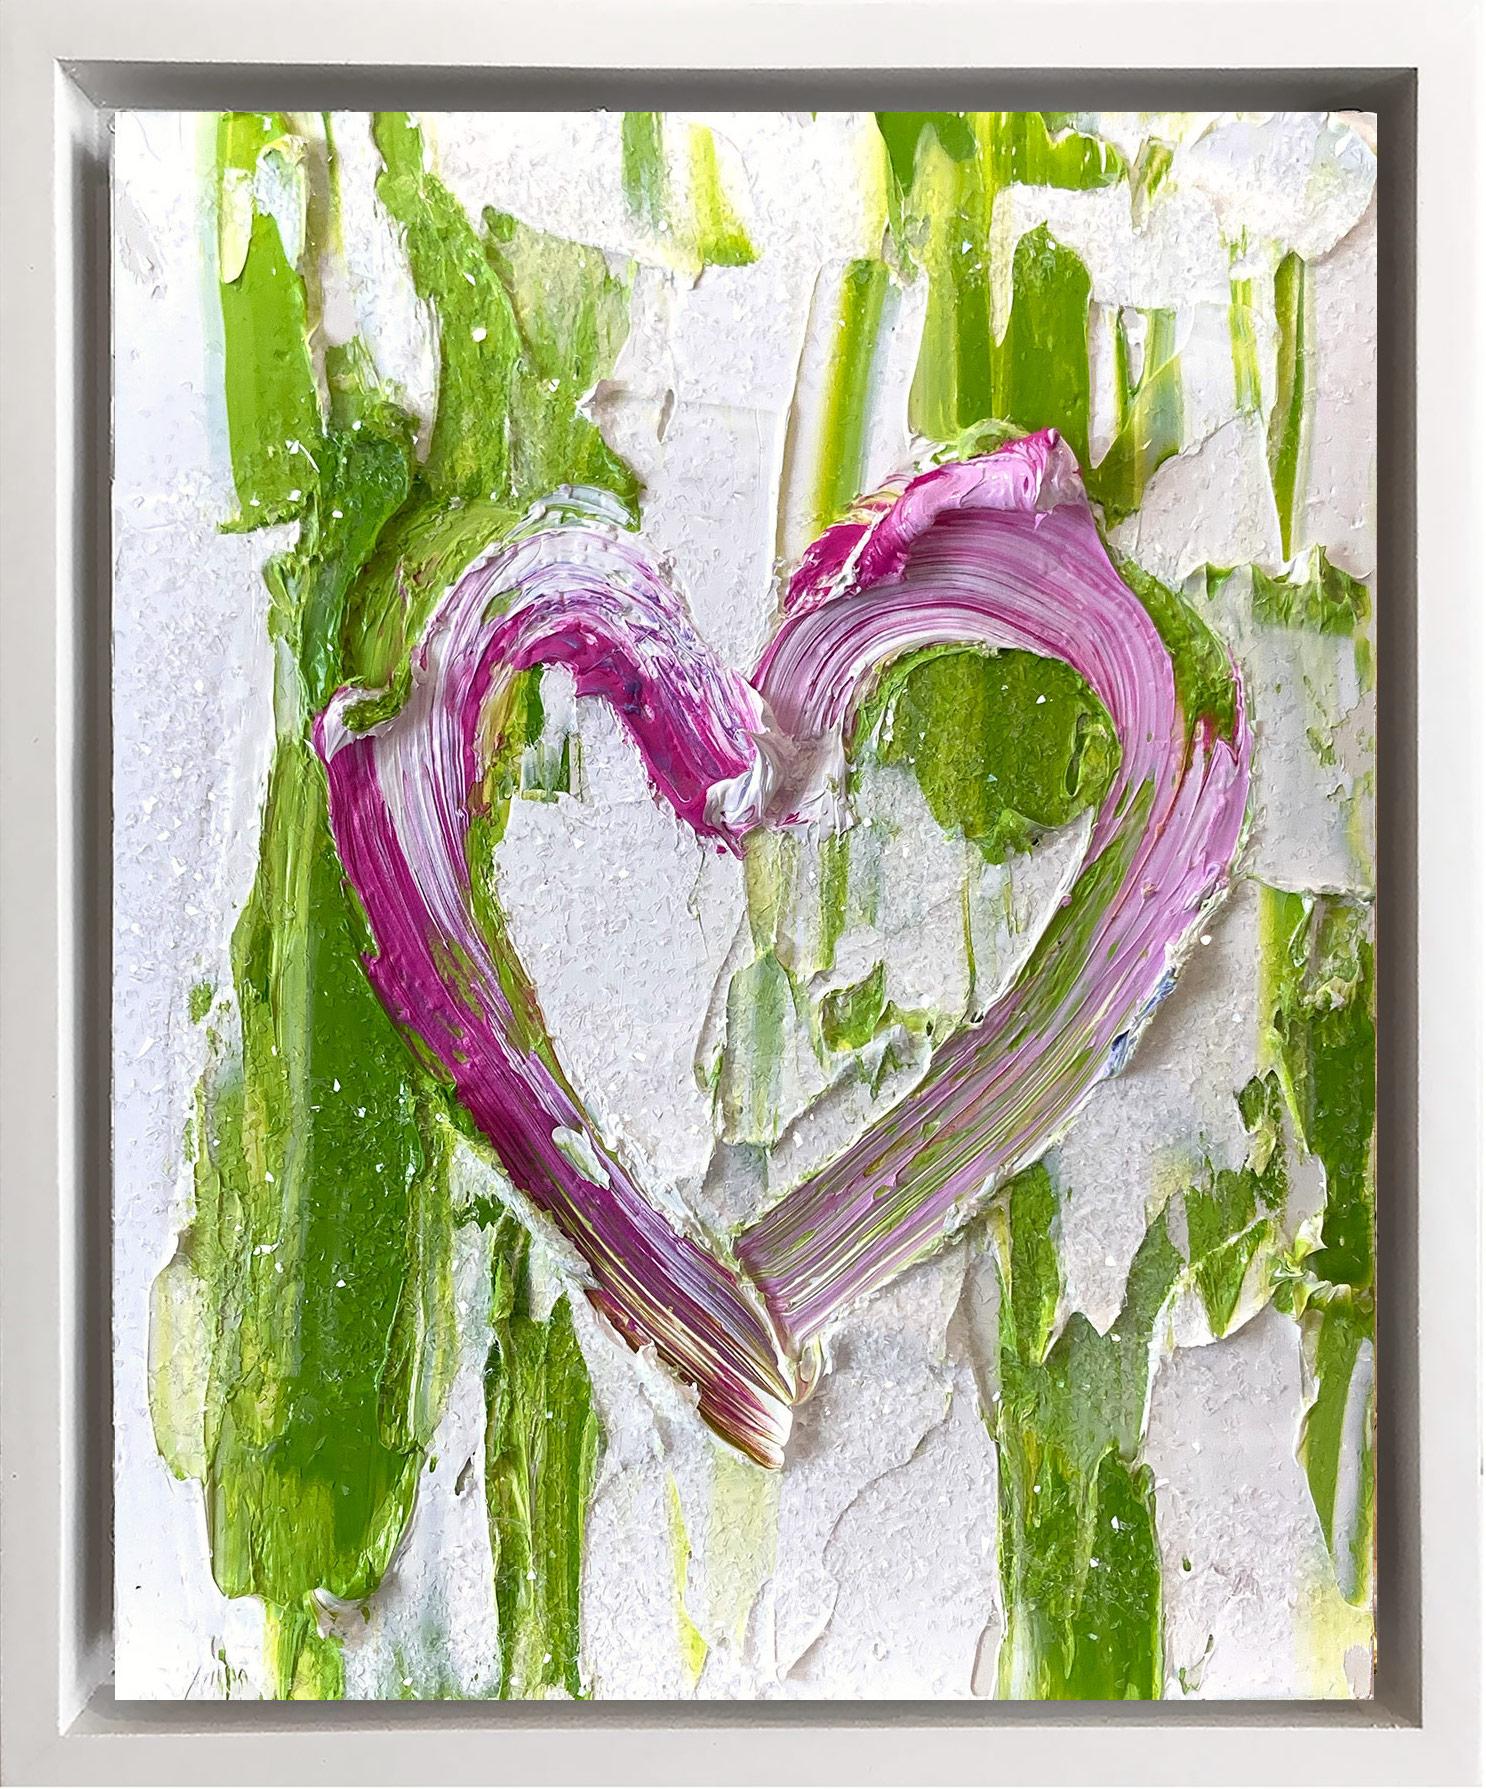 Cindy Shaoul Figurative Painting - "My Kiss Me Heart" Pink, Green & White Oil Painting with White Floater Frame